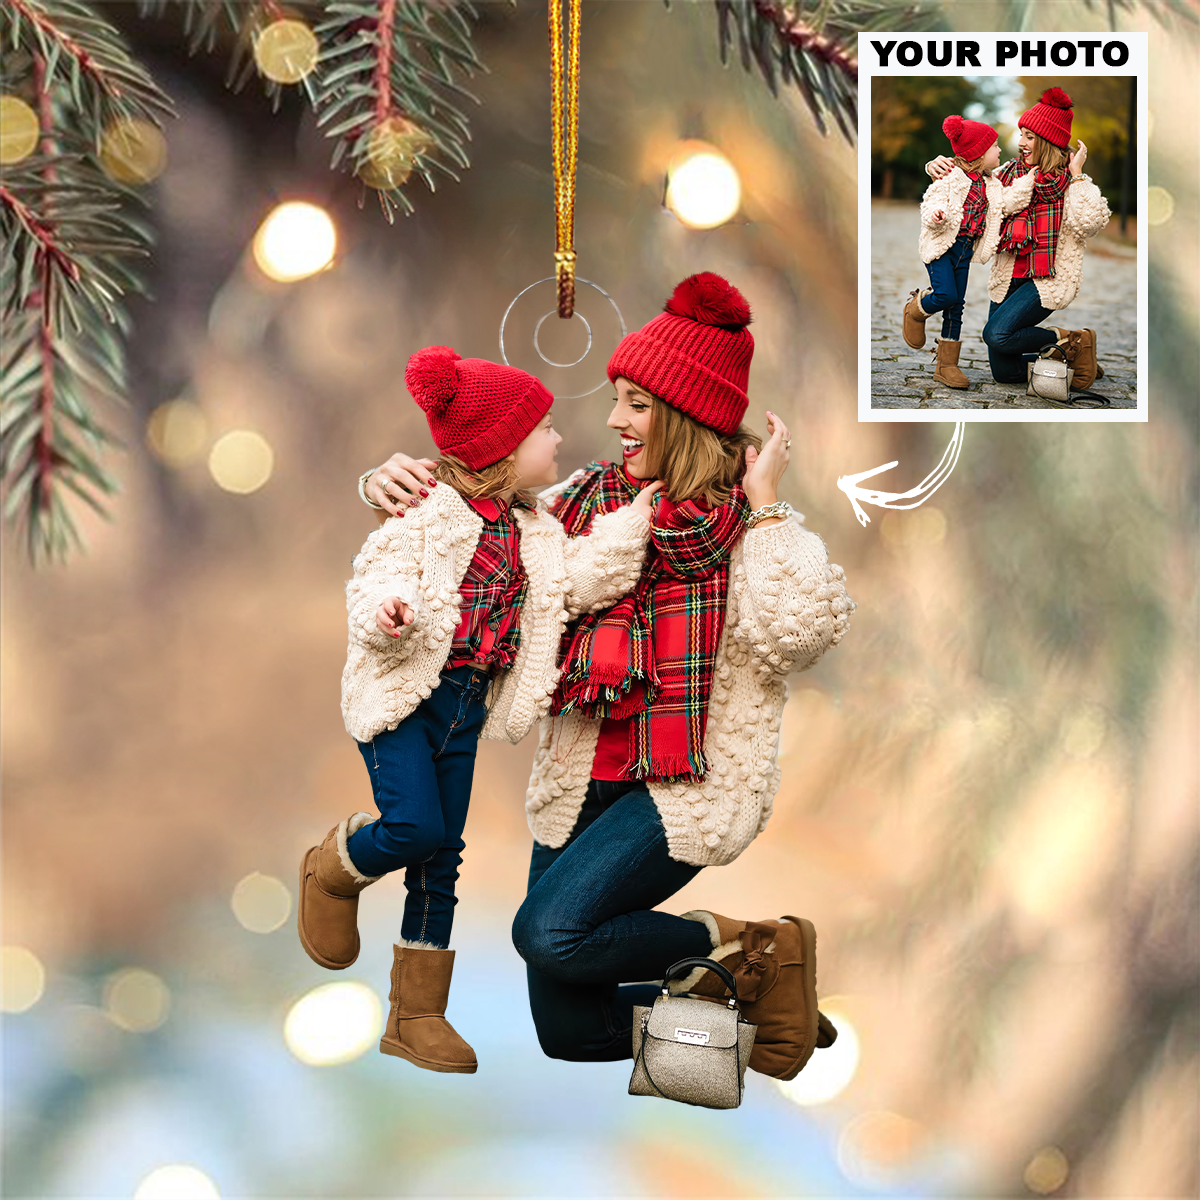 Customized Photo Ornament Mom & Her Babies - Personalized Photo Mica Ornament - Christmas Gift For Family Members, Mom, Grandma